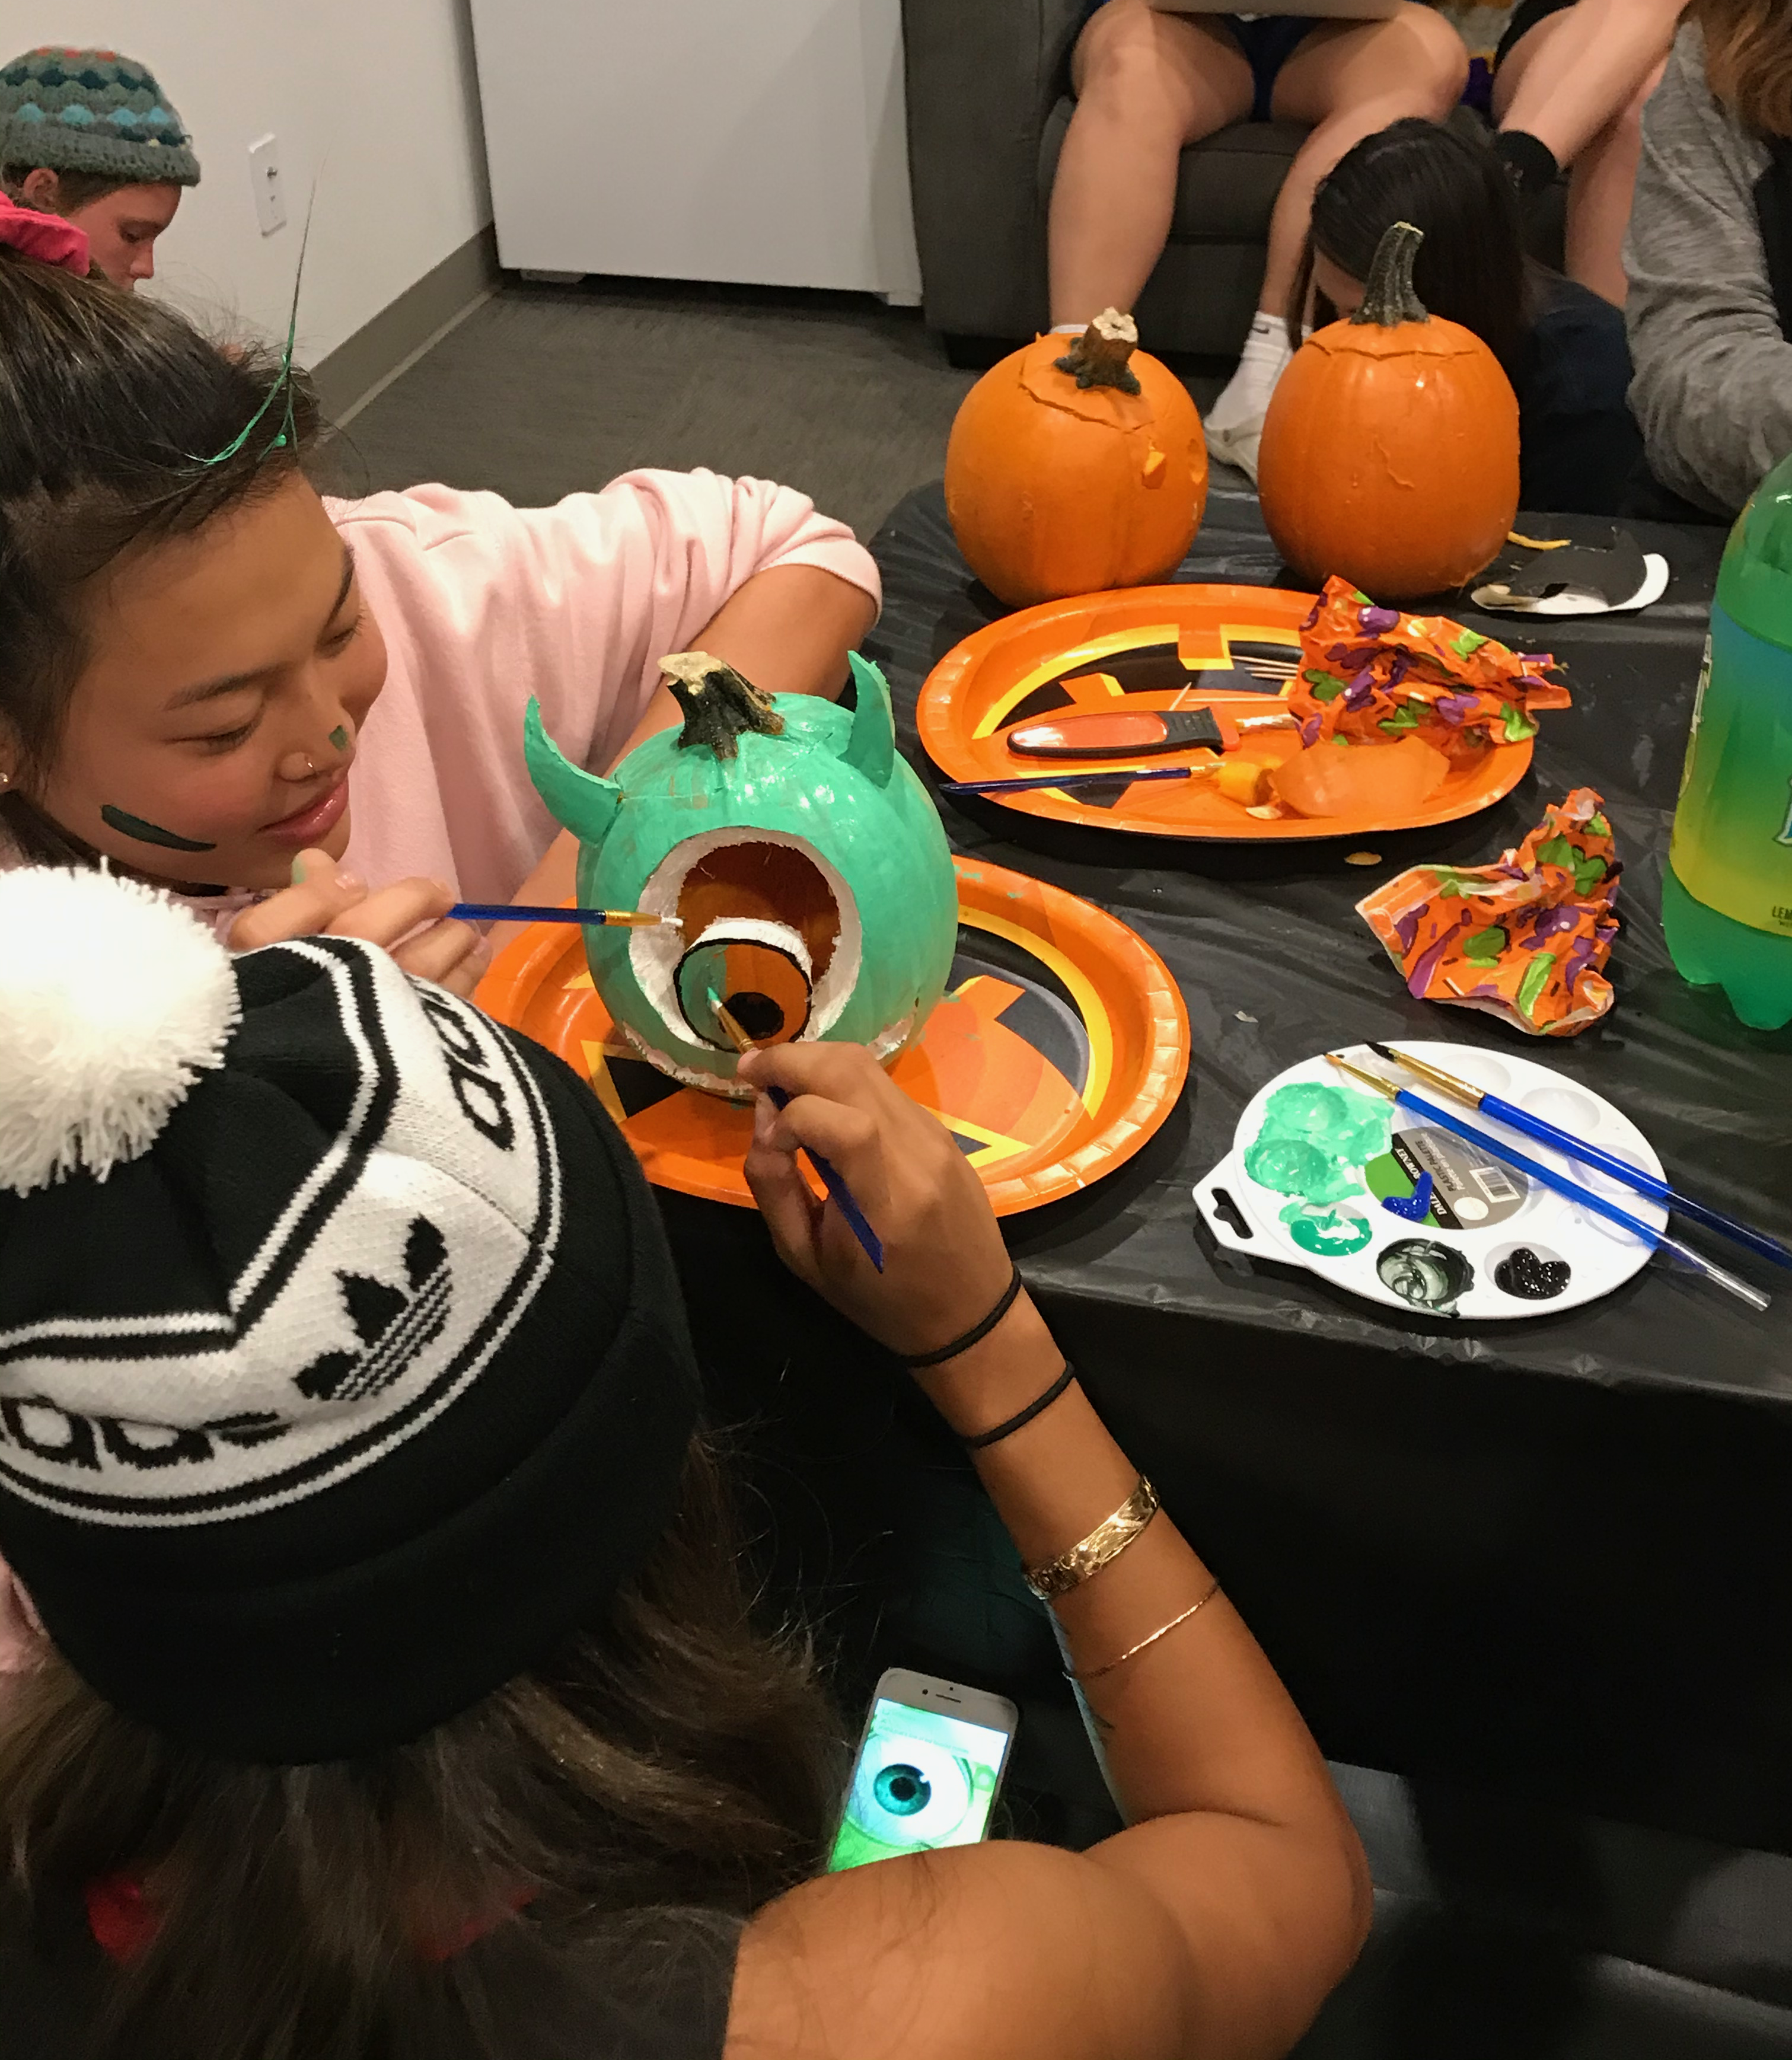 Two residents collaborating to finish decorating a pumpkin